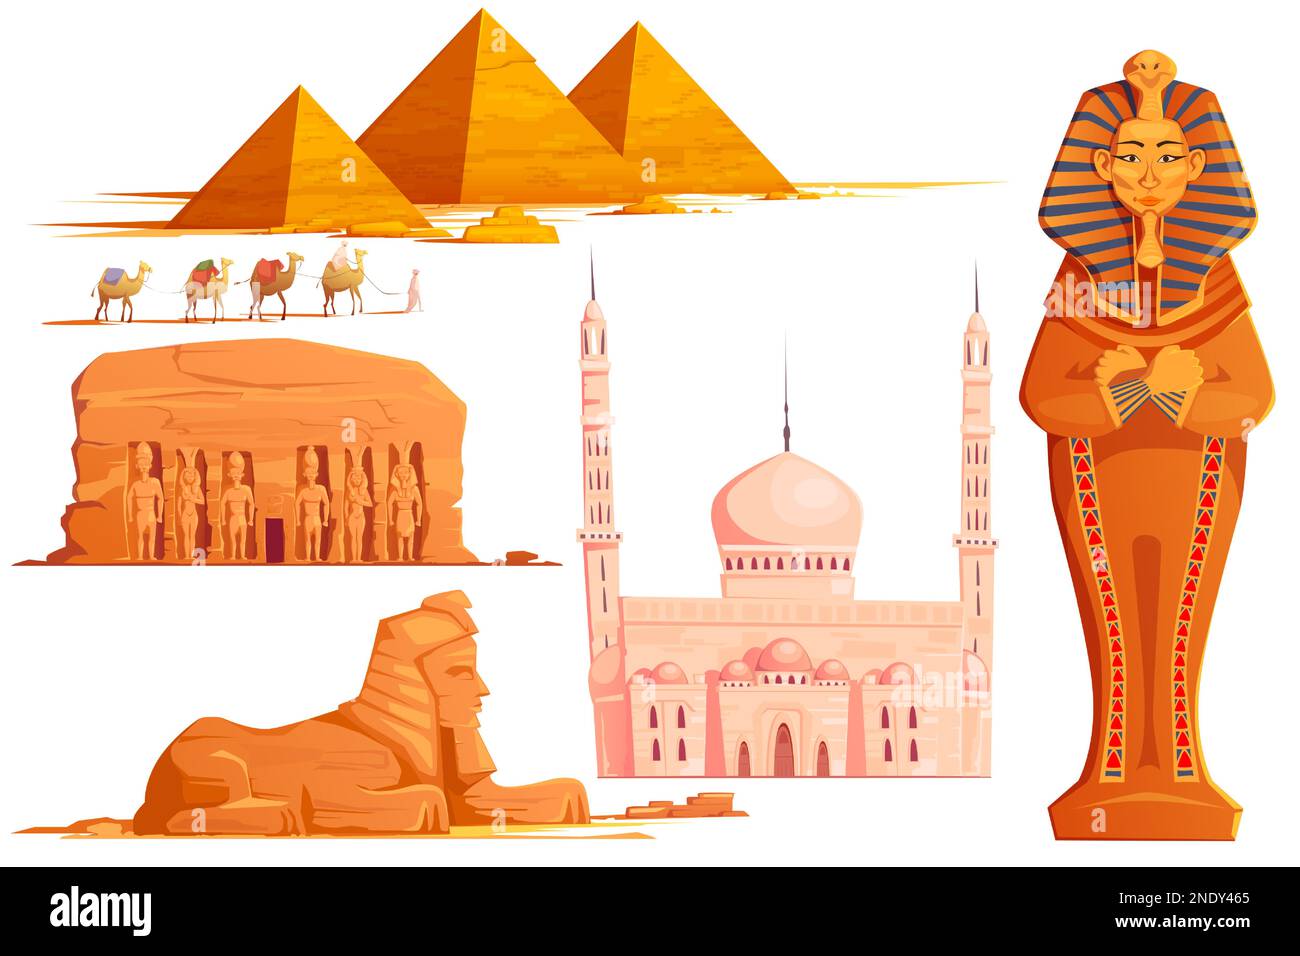 Ancient Egypt vector cartoon set. Egyptian culture symbol collection and famous place, pharaoh sarcophagus, sphinx, religious temple building with stone sculptures, pyramids and camel caravan isolated Stock Vector